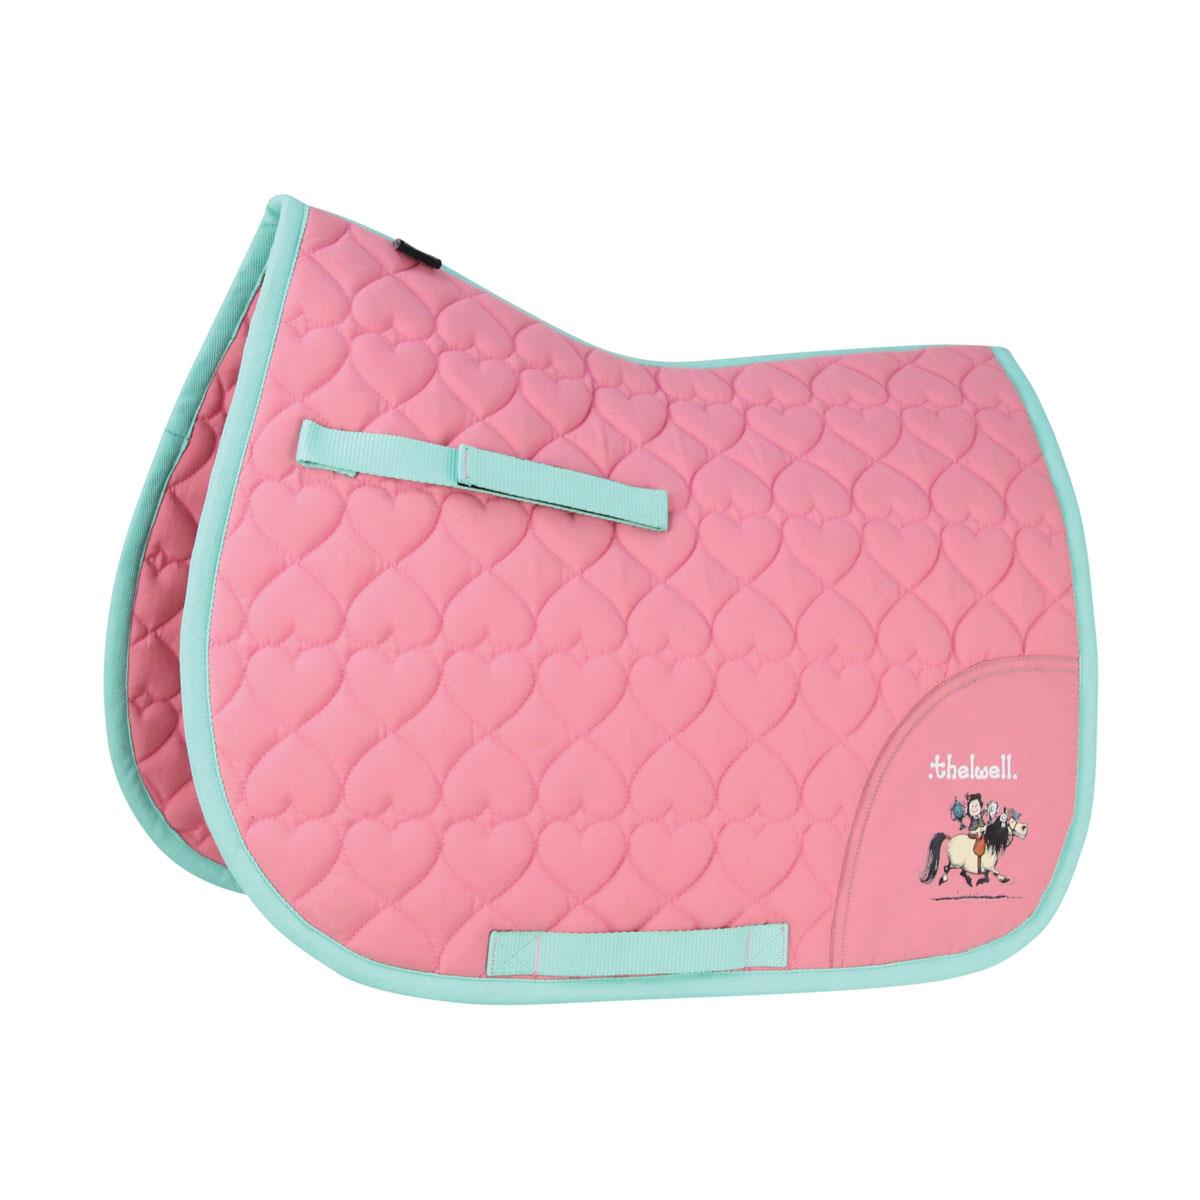 Hy Equestrian Thelwell Collection Trophy Saddle Pad - Just Horse Riders